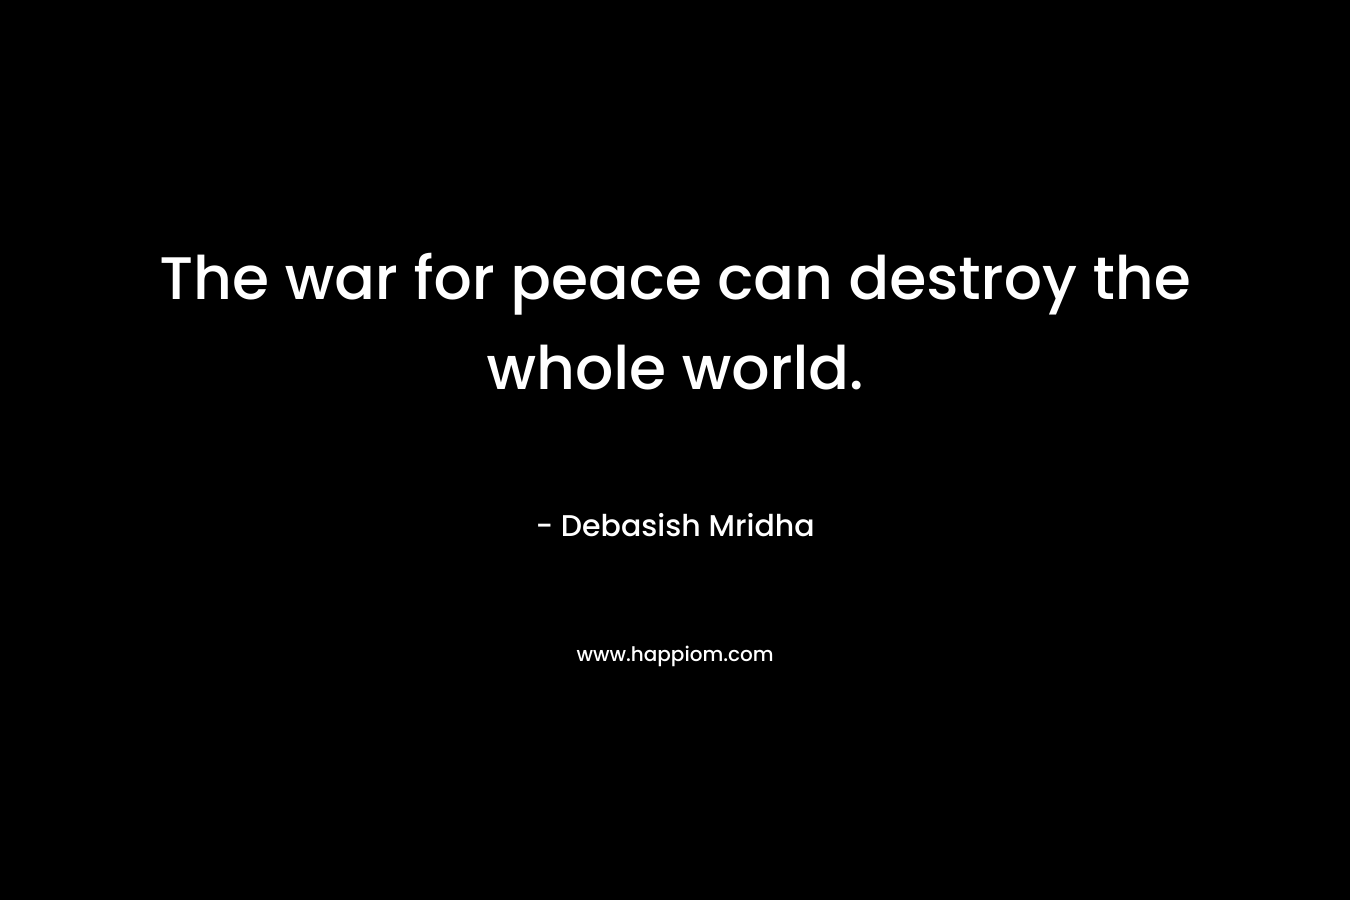 The war for peace can destroy the whole world.